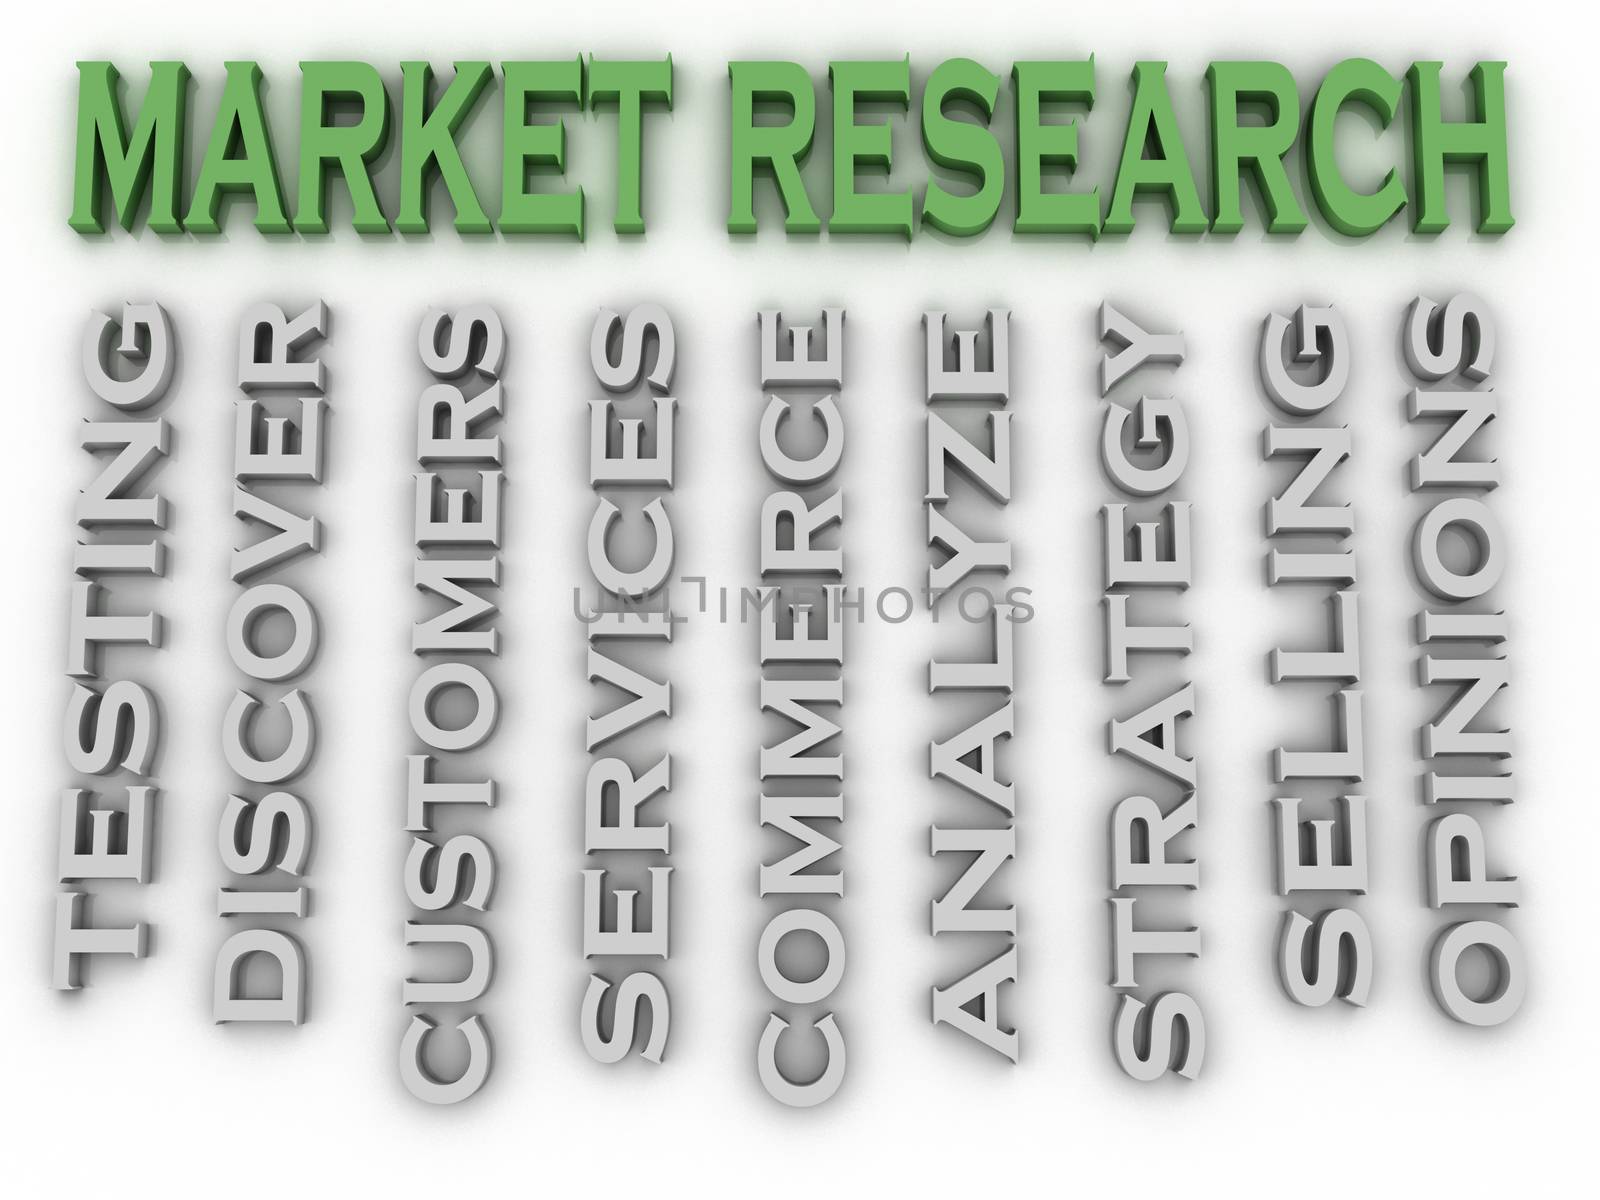 3d image Market Research issues concept word cloud background by dacasdo